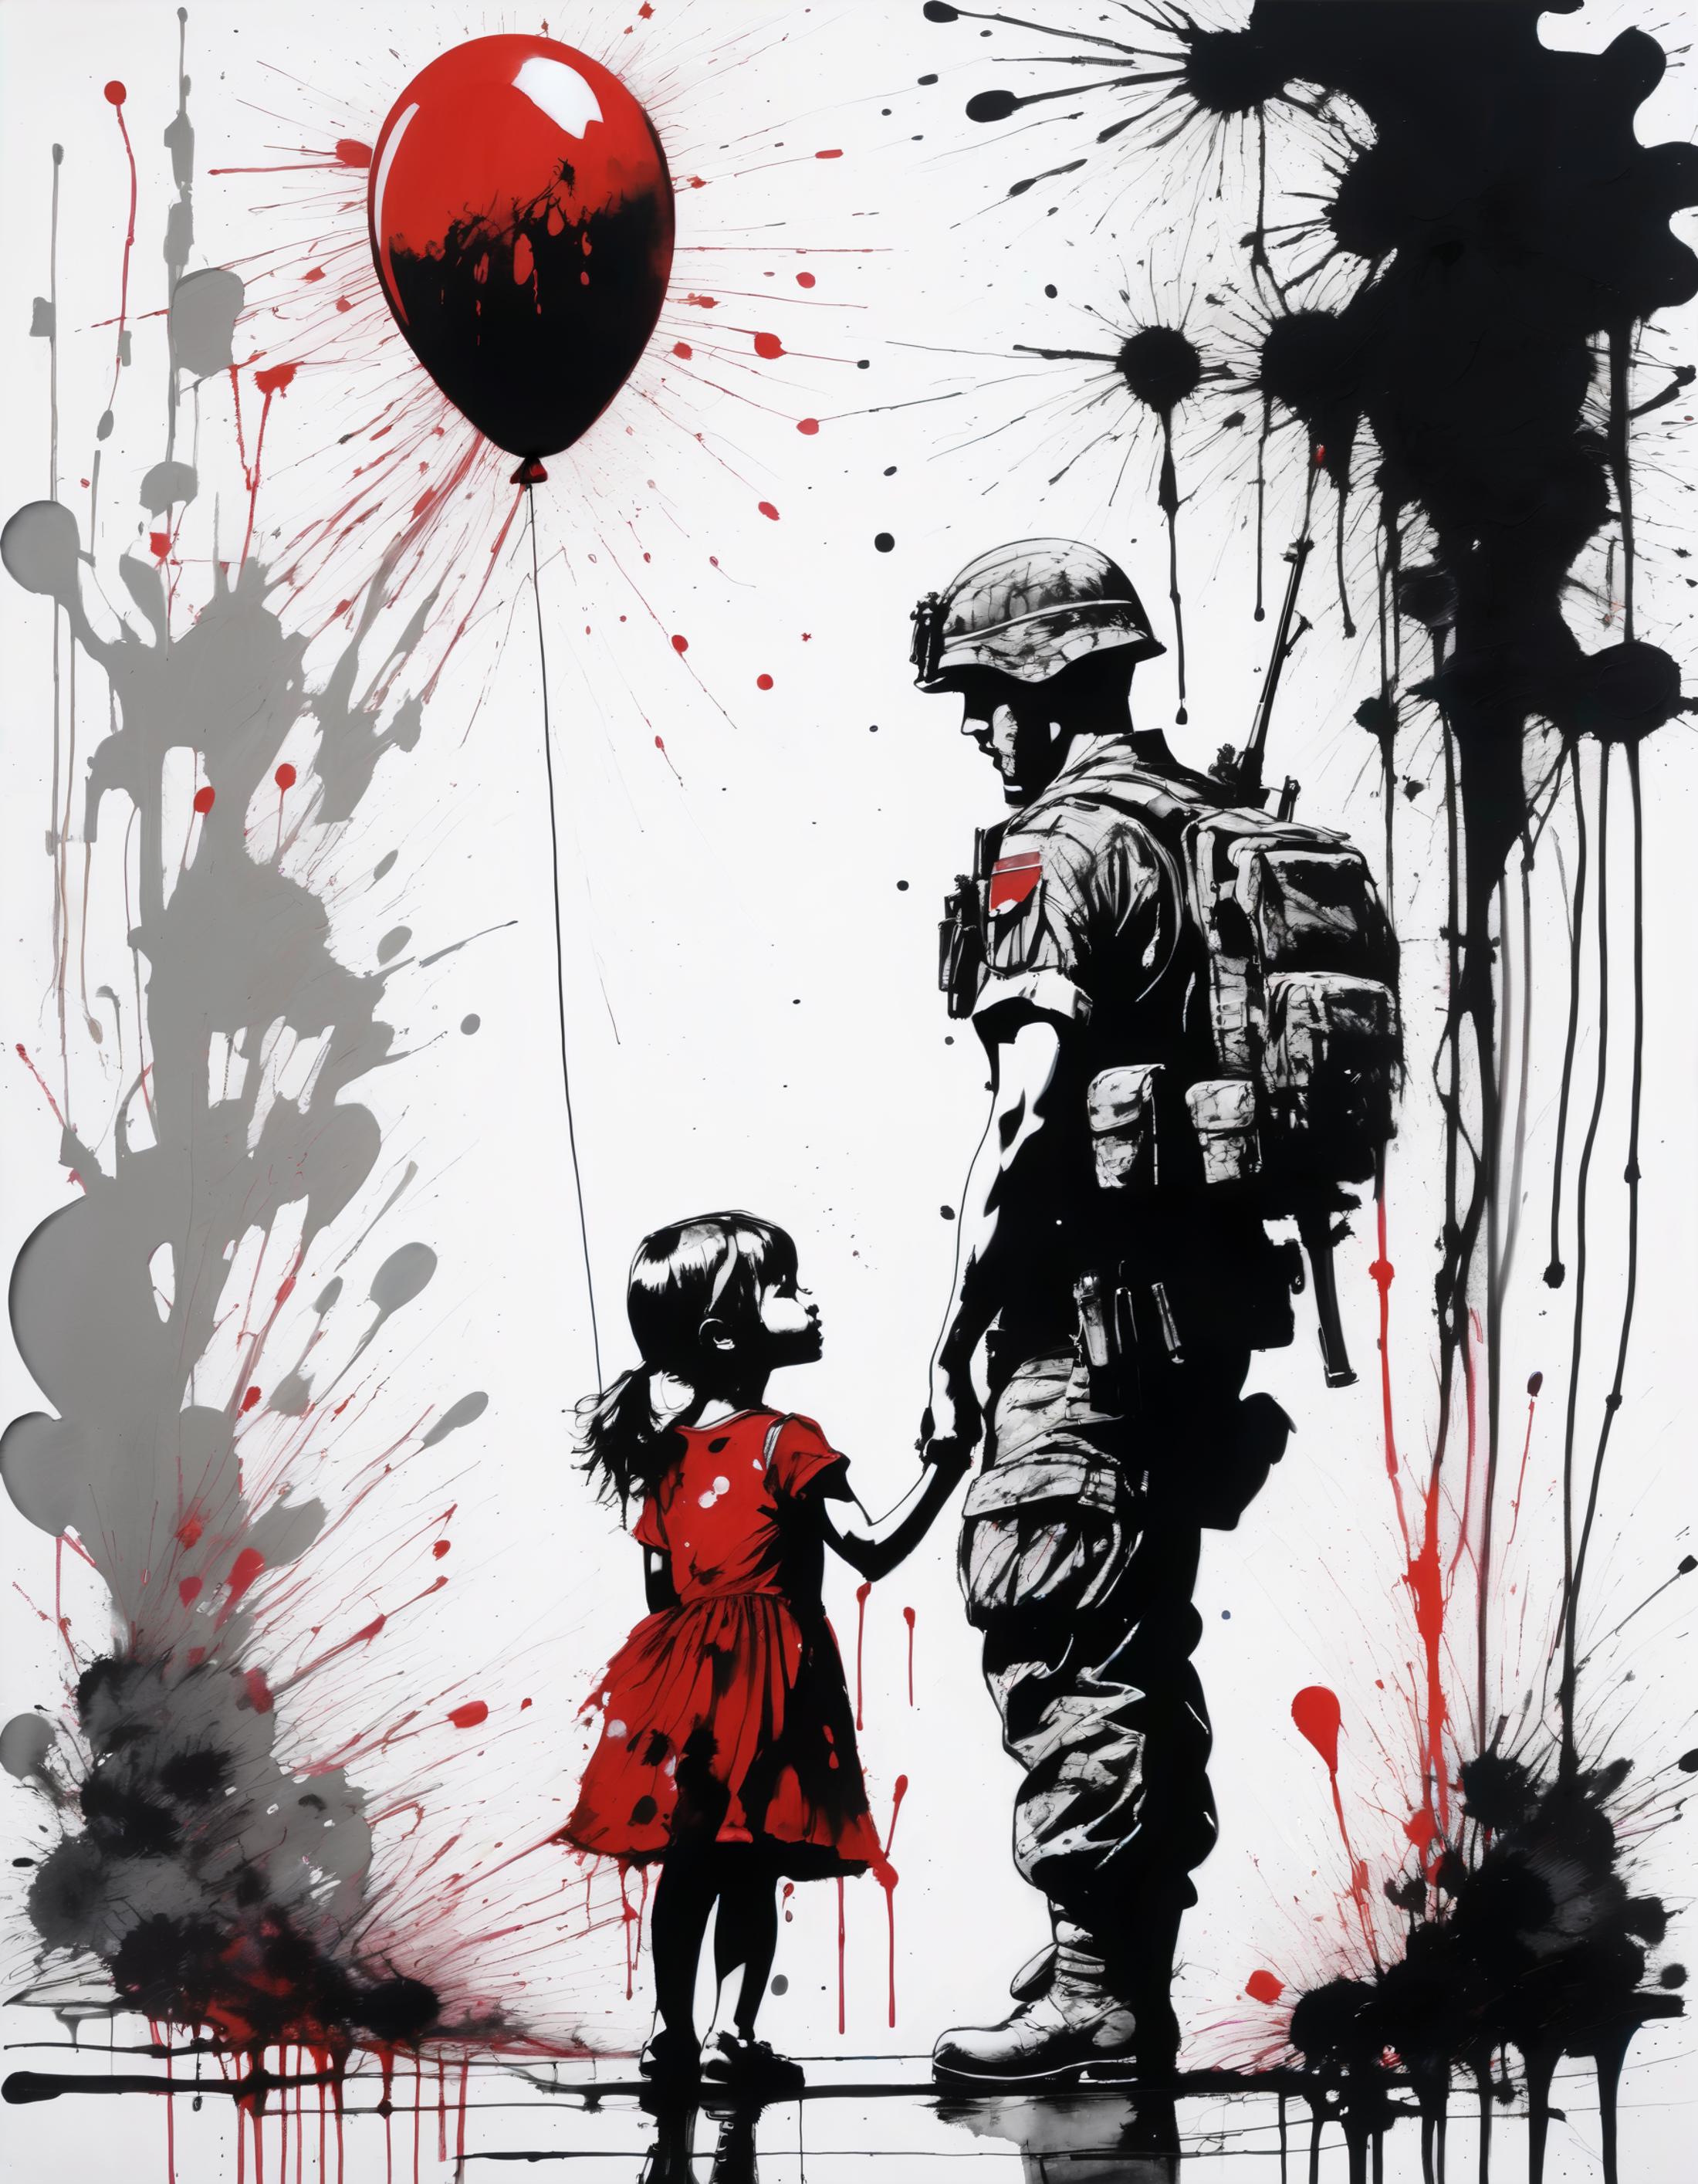 A Soldier and a Little Girl Holding Hands